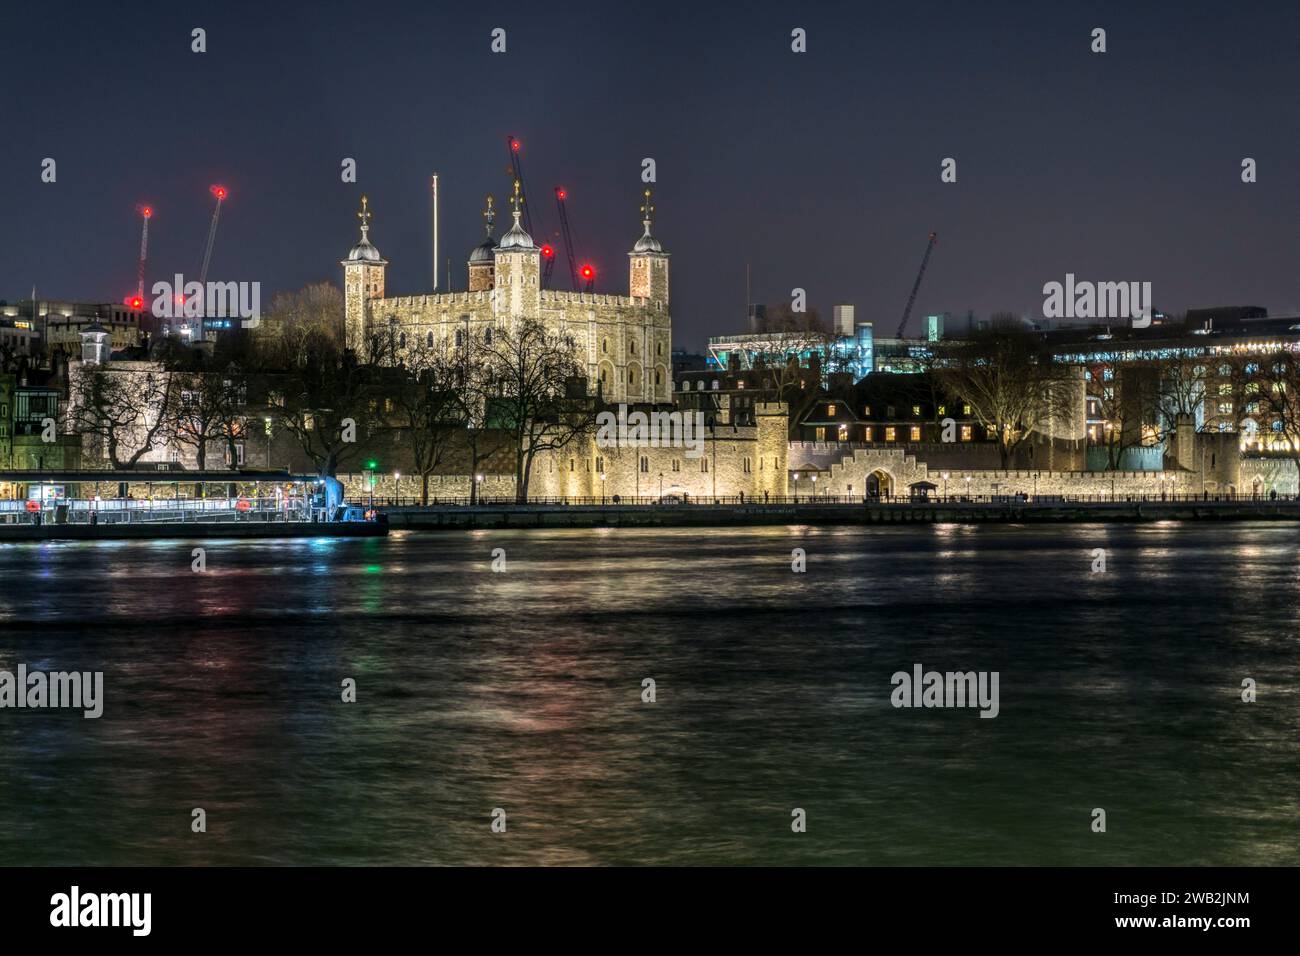 The White Tower of the Tower of London seen across the River Thames at night. Stock Photo